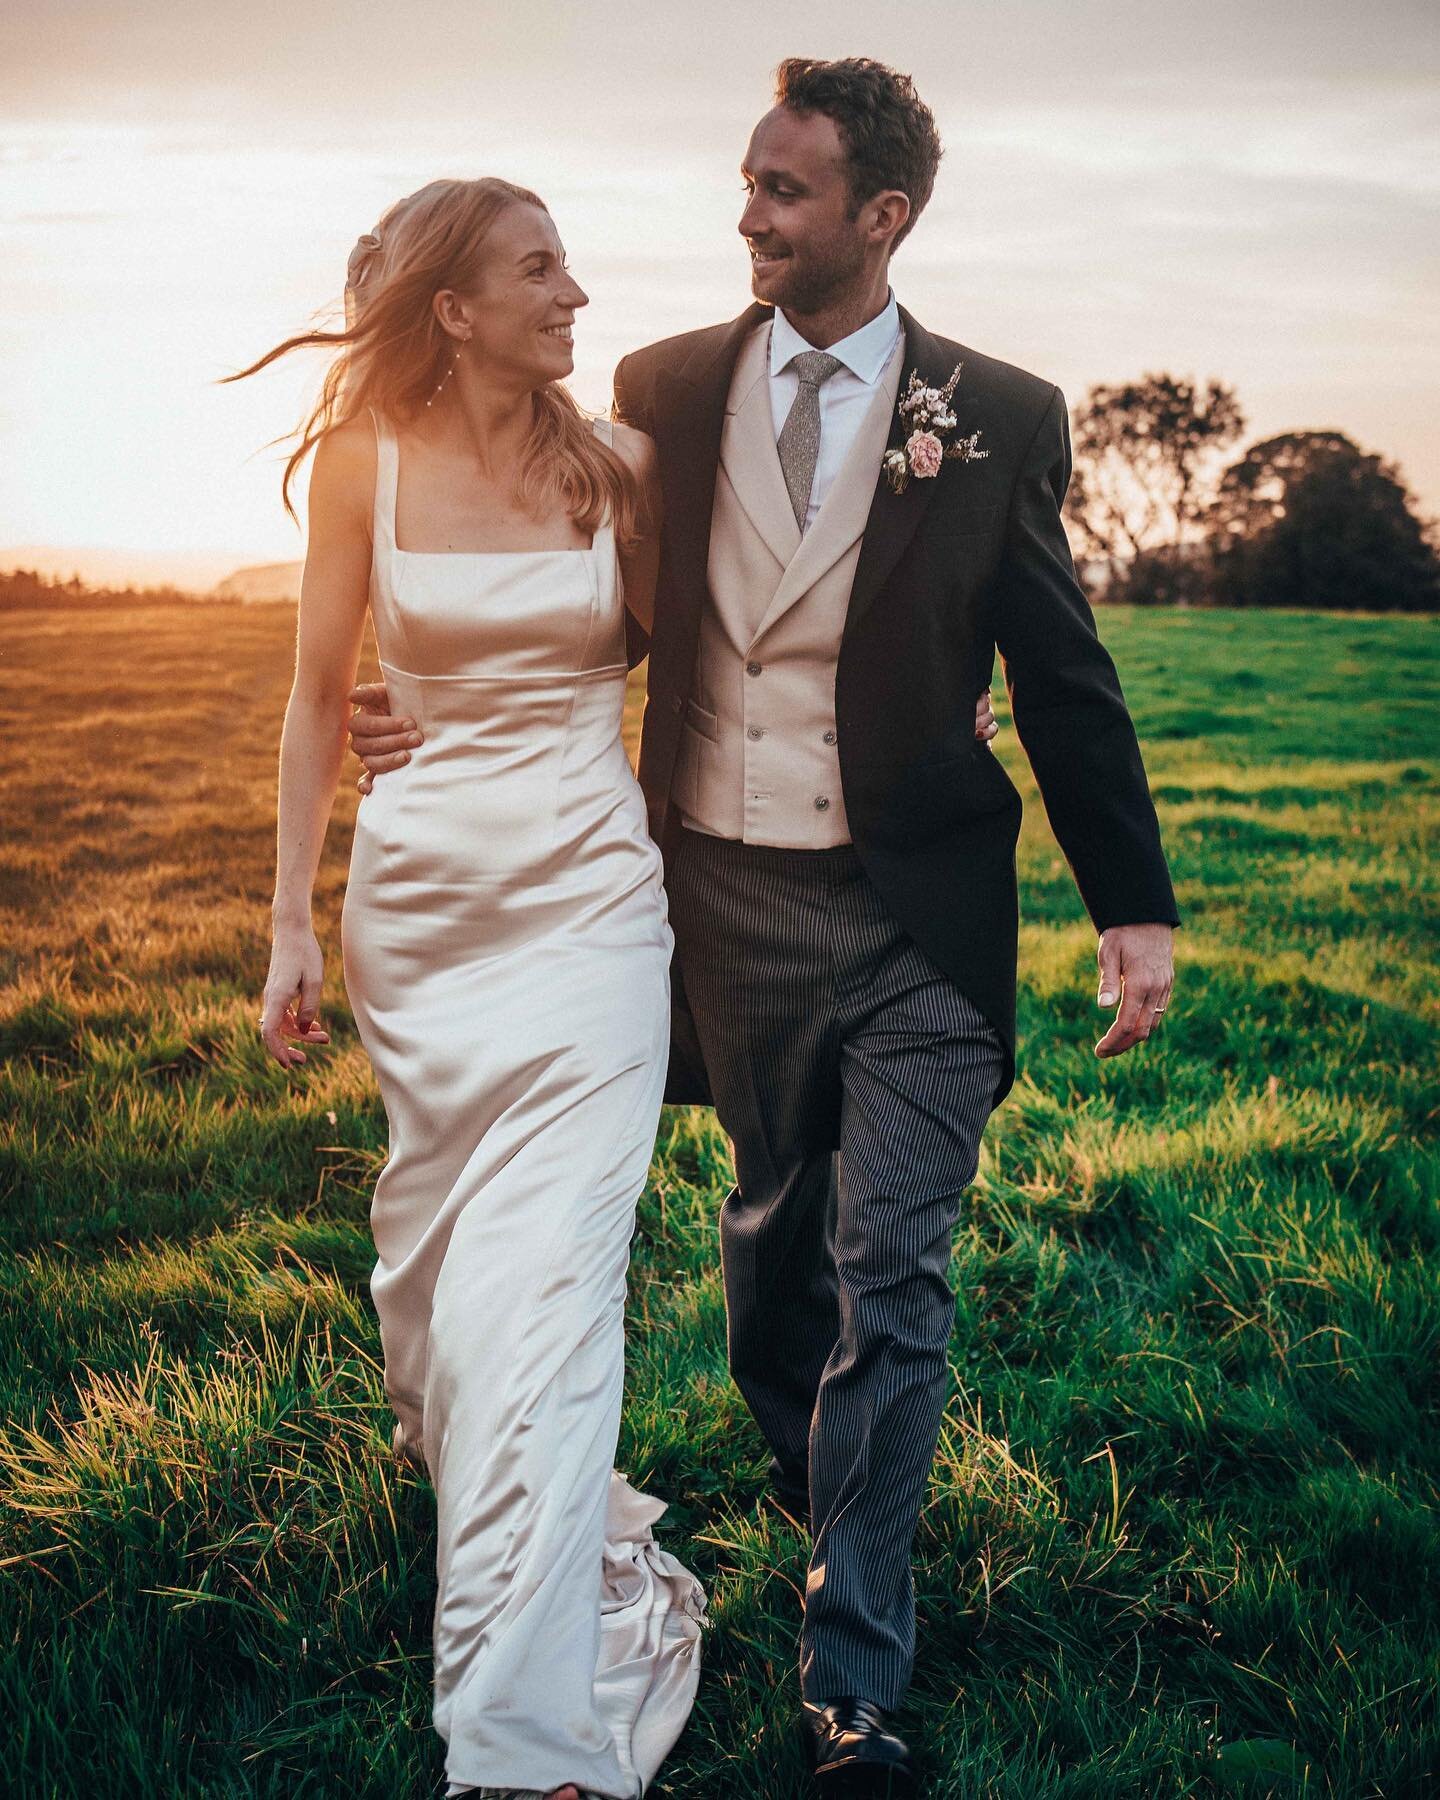 Abi &amp; George 

A stunning sunset to end the day 

Flowers- Luna Bloom
Dress - bespoke design made by Blake Ida
Head pieces - Lucy Brice Millinery
Linen - Northfields Linen
Hair: Vicky M Hair Stylist
Makeup: @sarahsevernmakeup